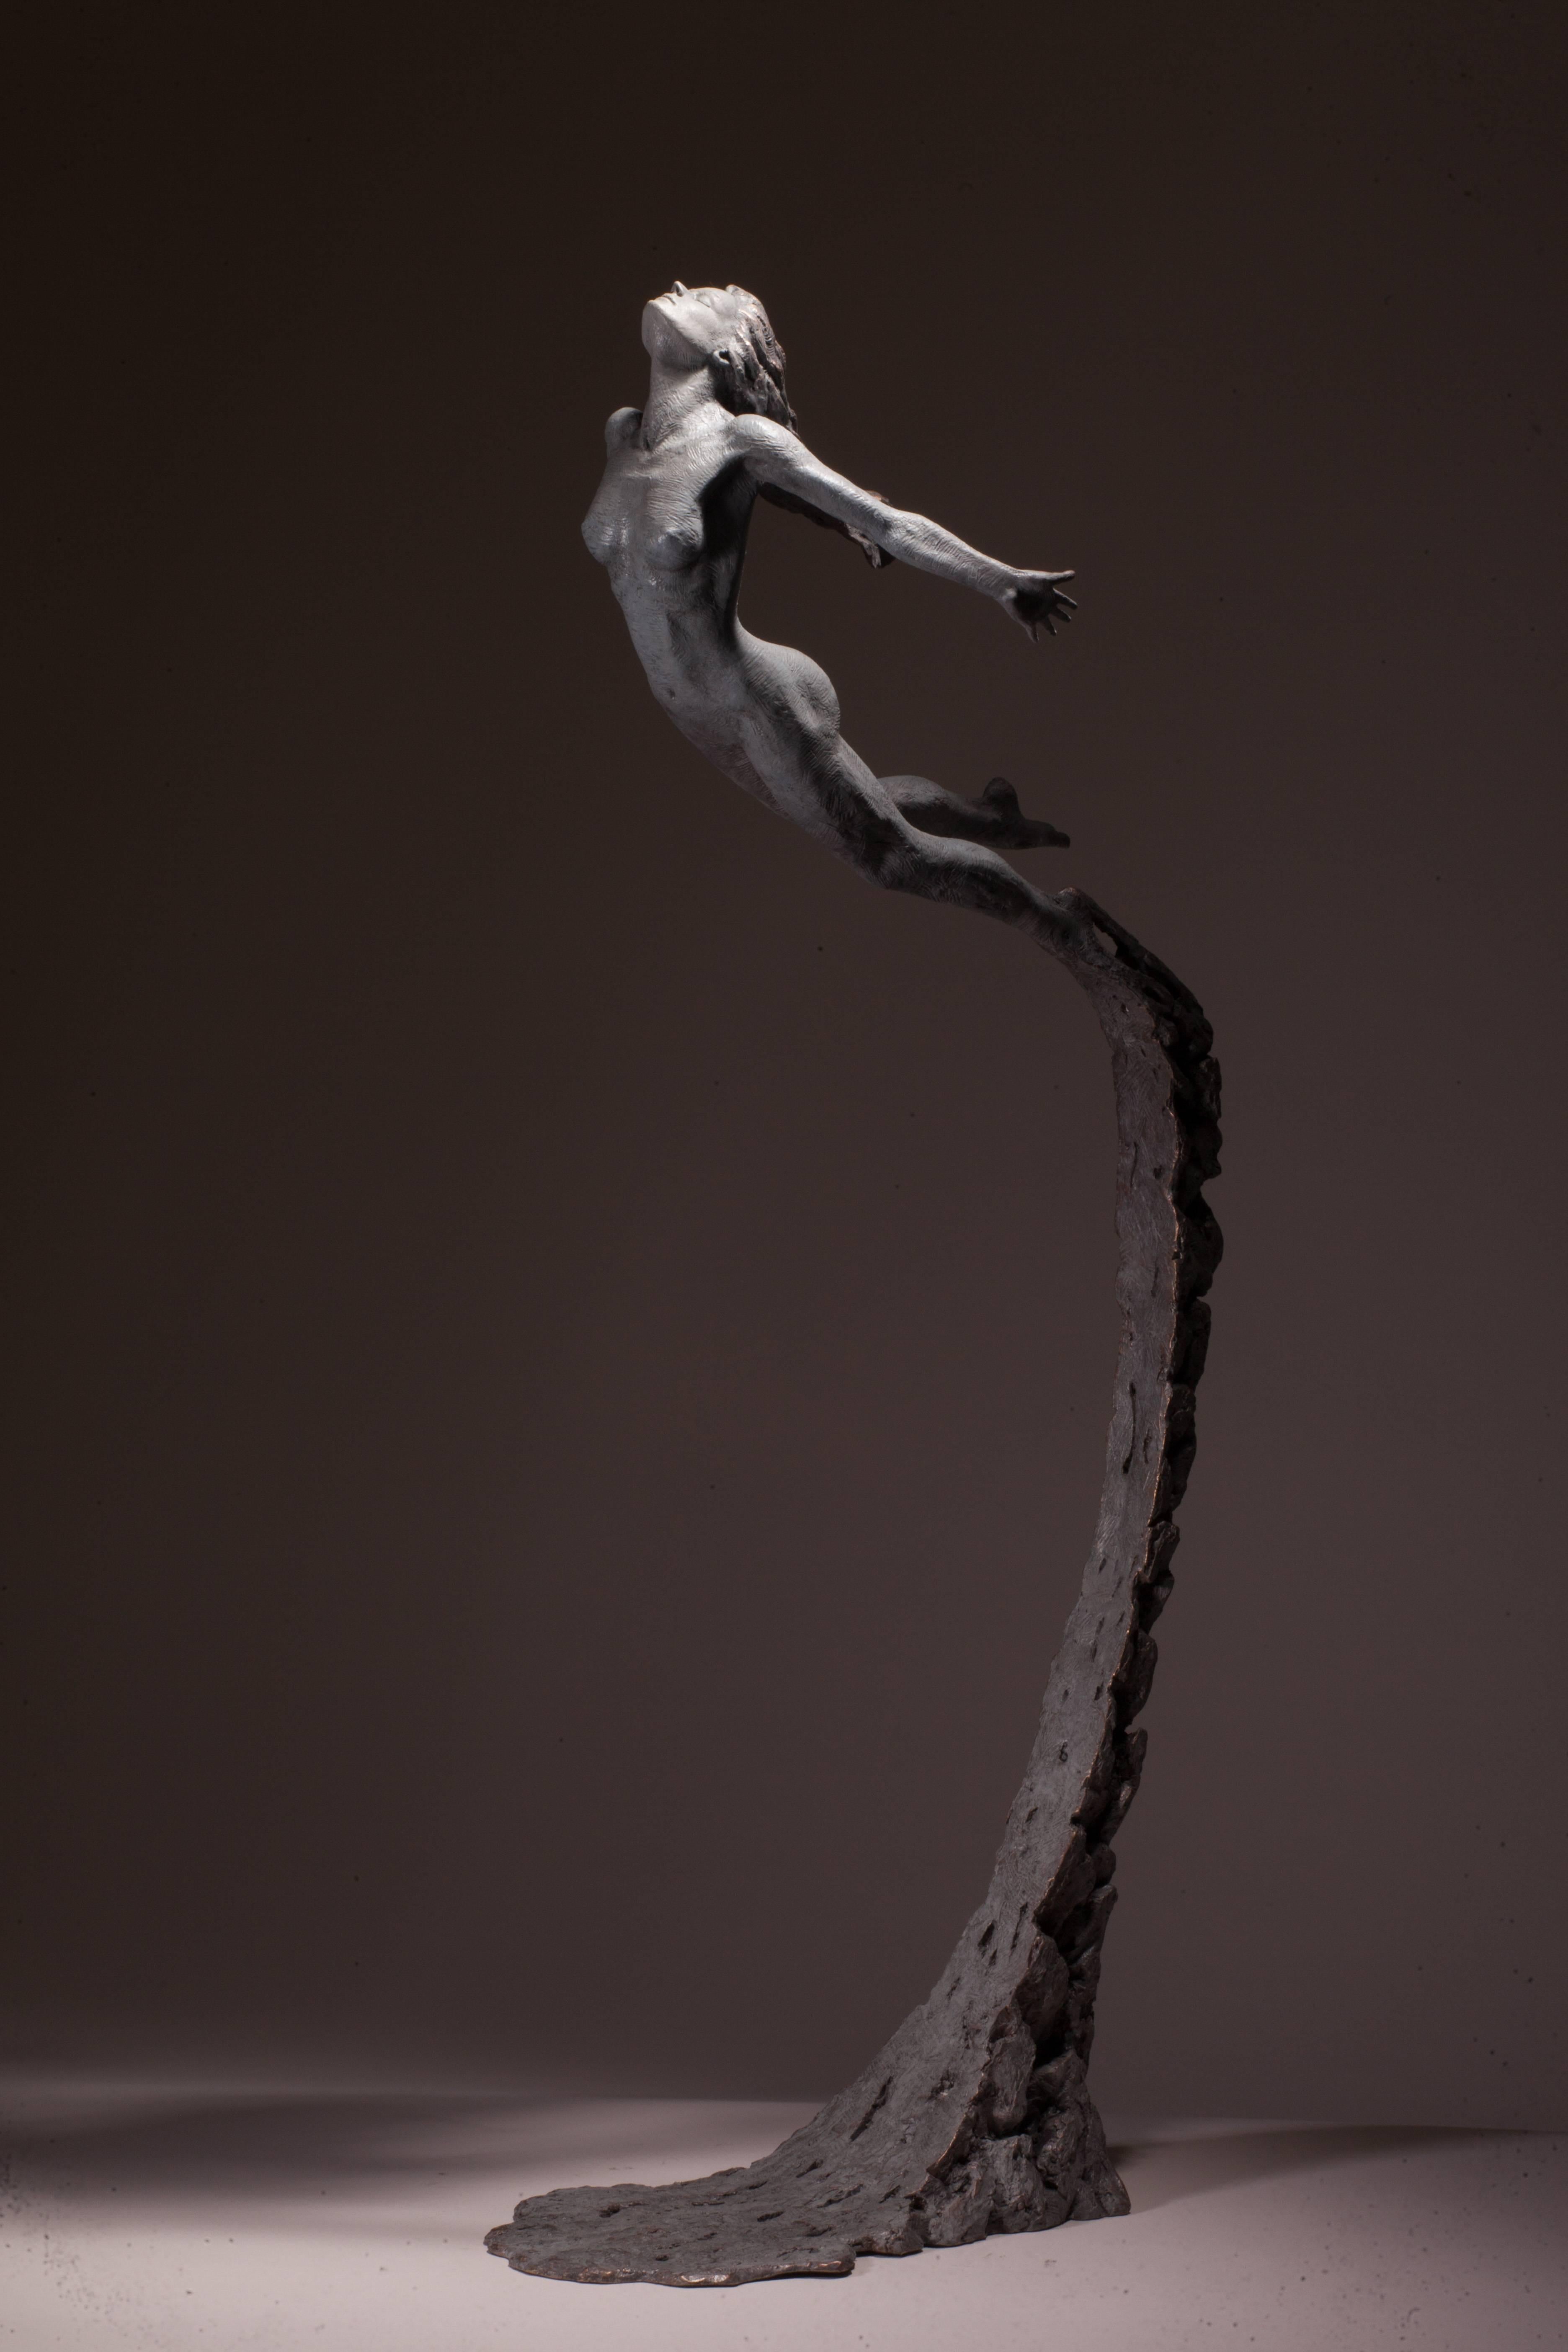 Ian Edwards - Leap Within Faith - Original Signed Bronze Sculpure
Dimensions: 170 x 55 x 40 cm 
Edition of 12	

Edwards’ practice expresses the power and determination of human endeavour. He
draws inspiration from natural forces, with his powerful